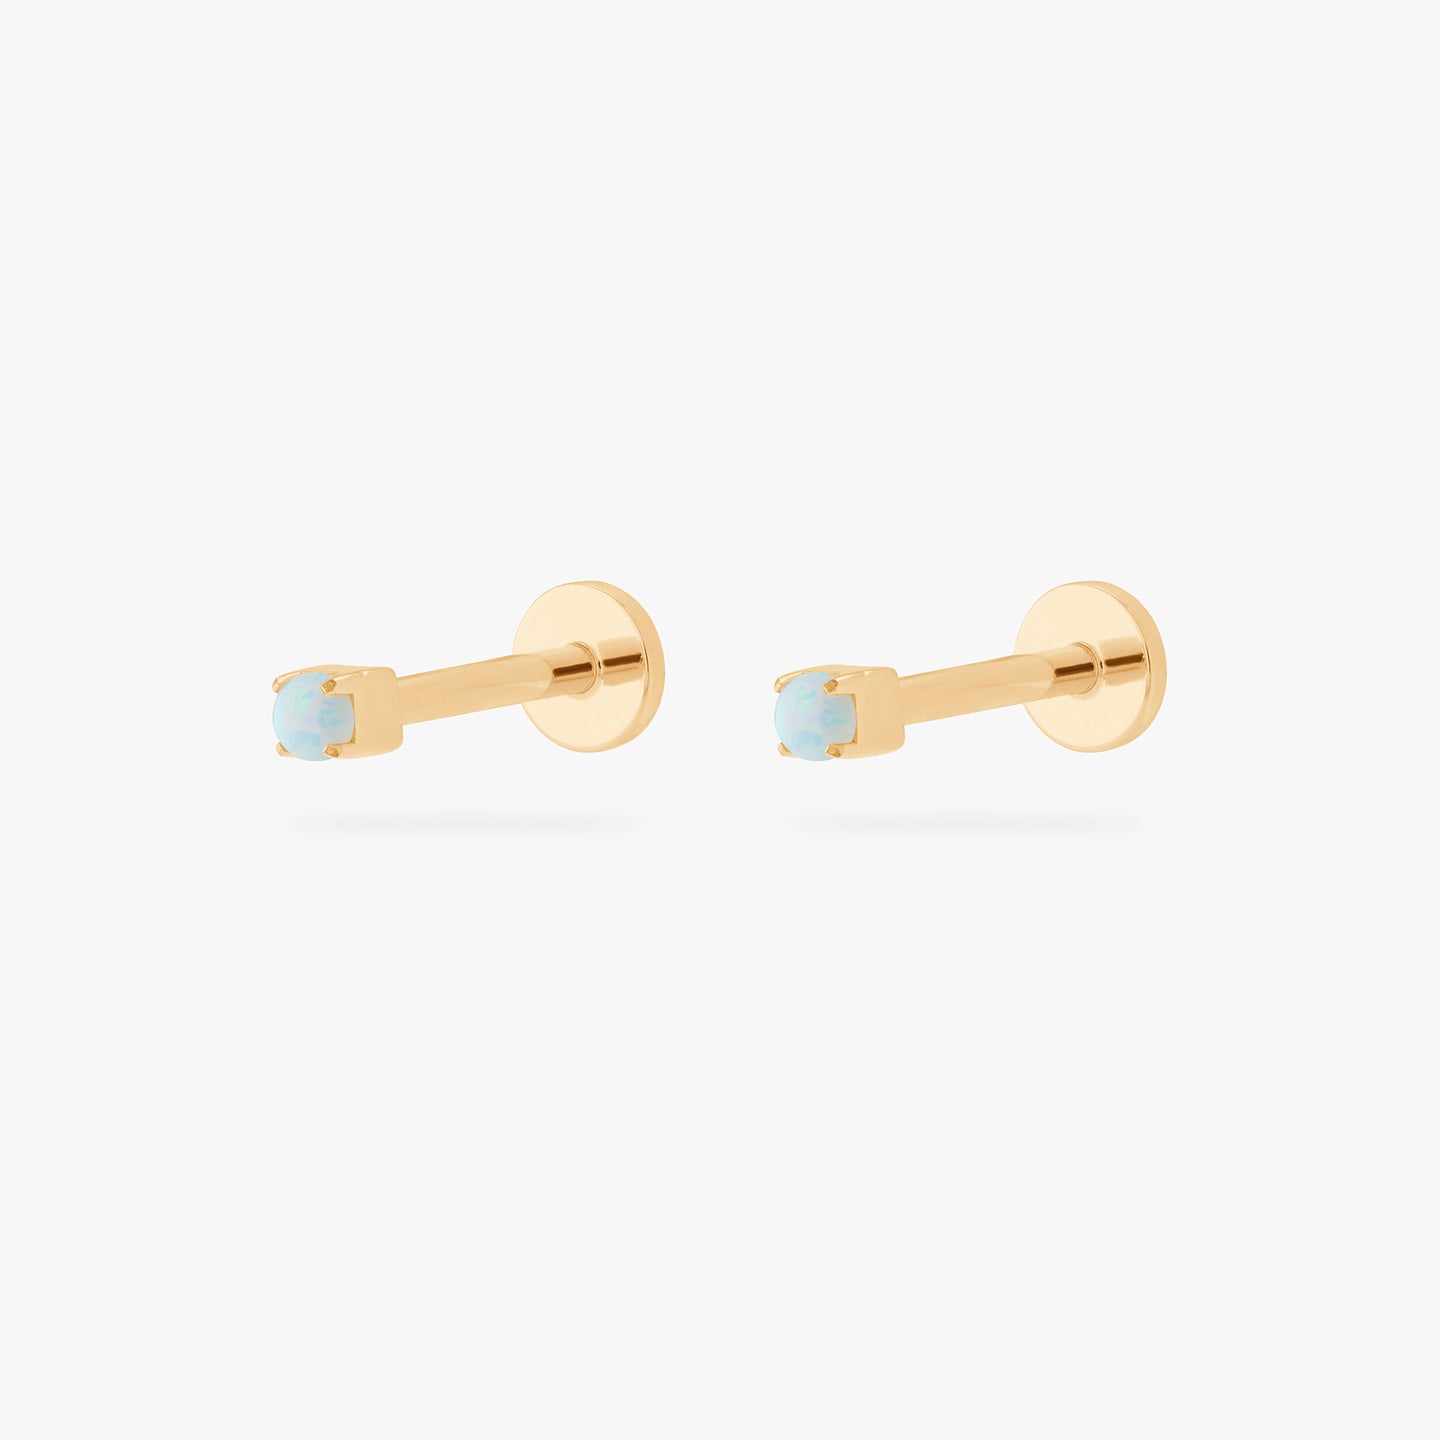 This is an image of a pair of gold/opal flatback tops with gold labrets with circle discs and the 